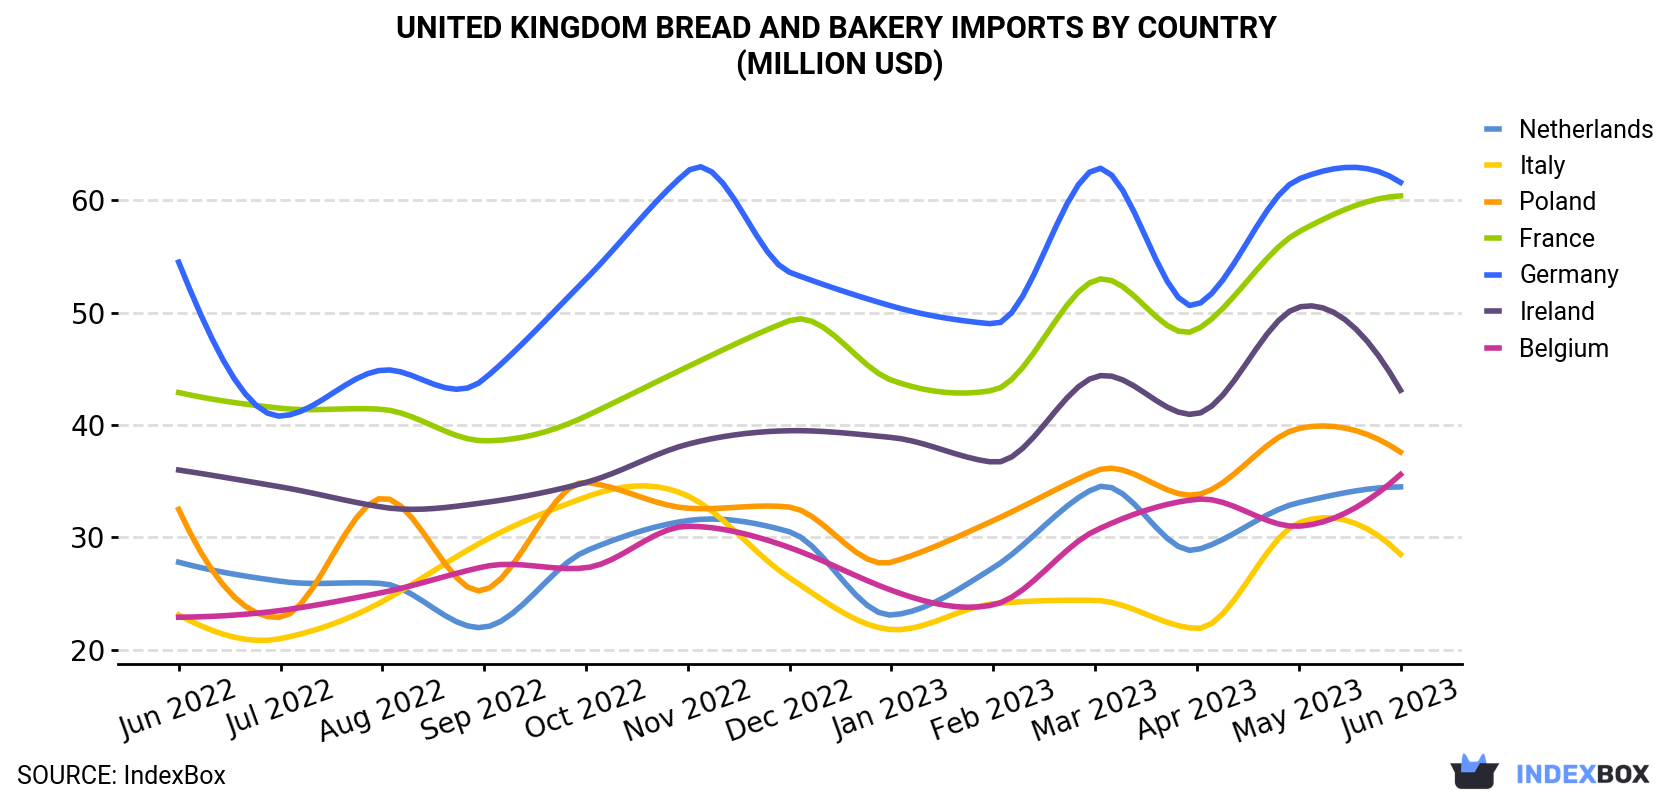 United Kingdom Bread and Bakery Imports By Country (Million USD)